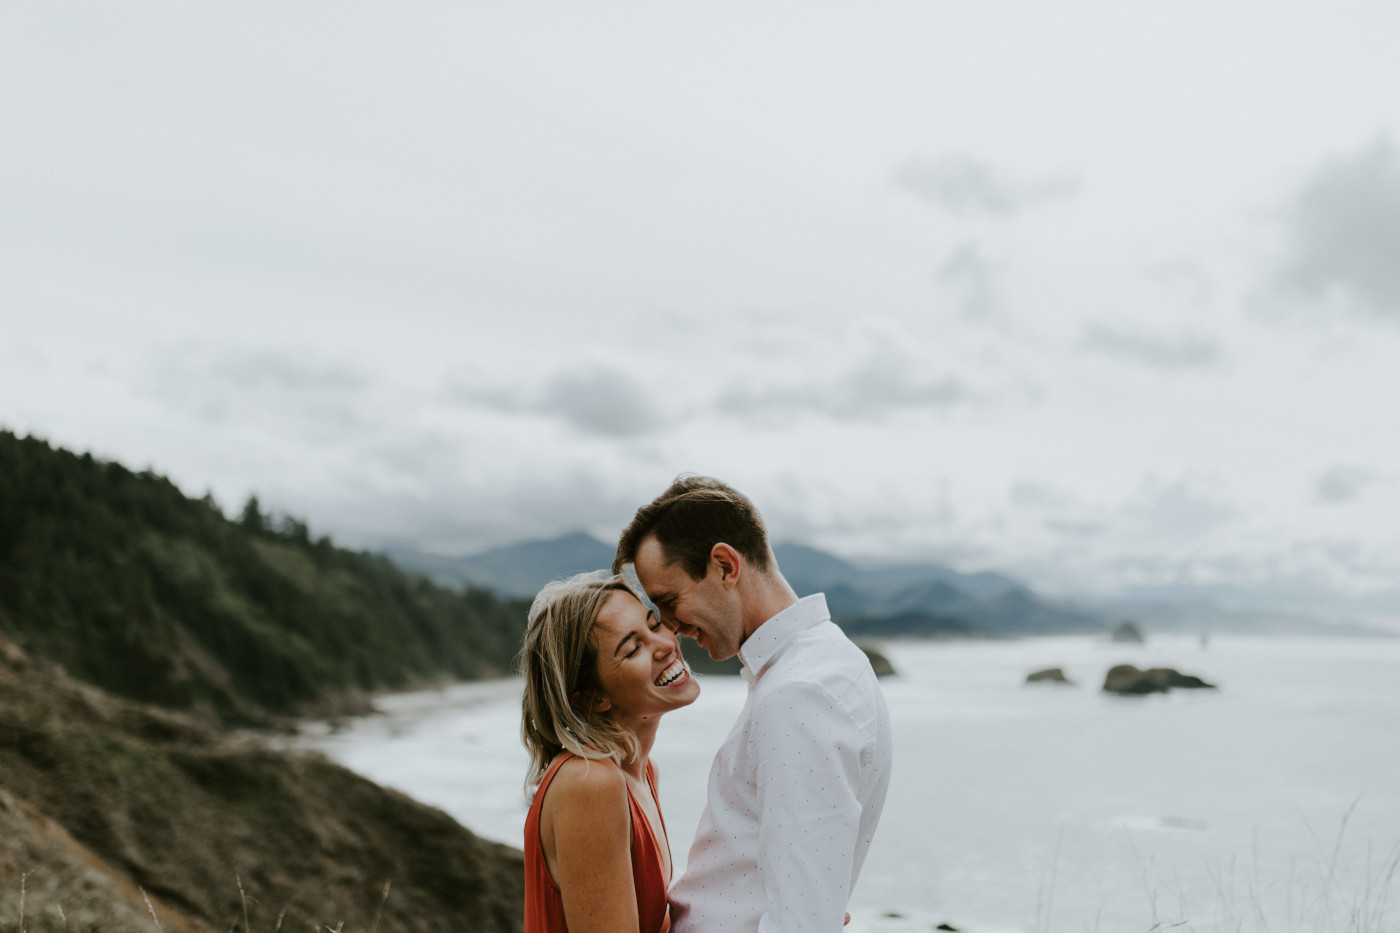 Chelsey laughs with Billy. Elopement wedding photography at Cannon Beach by Sienna Plus Josh.